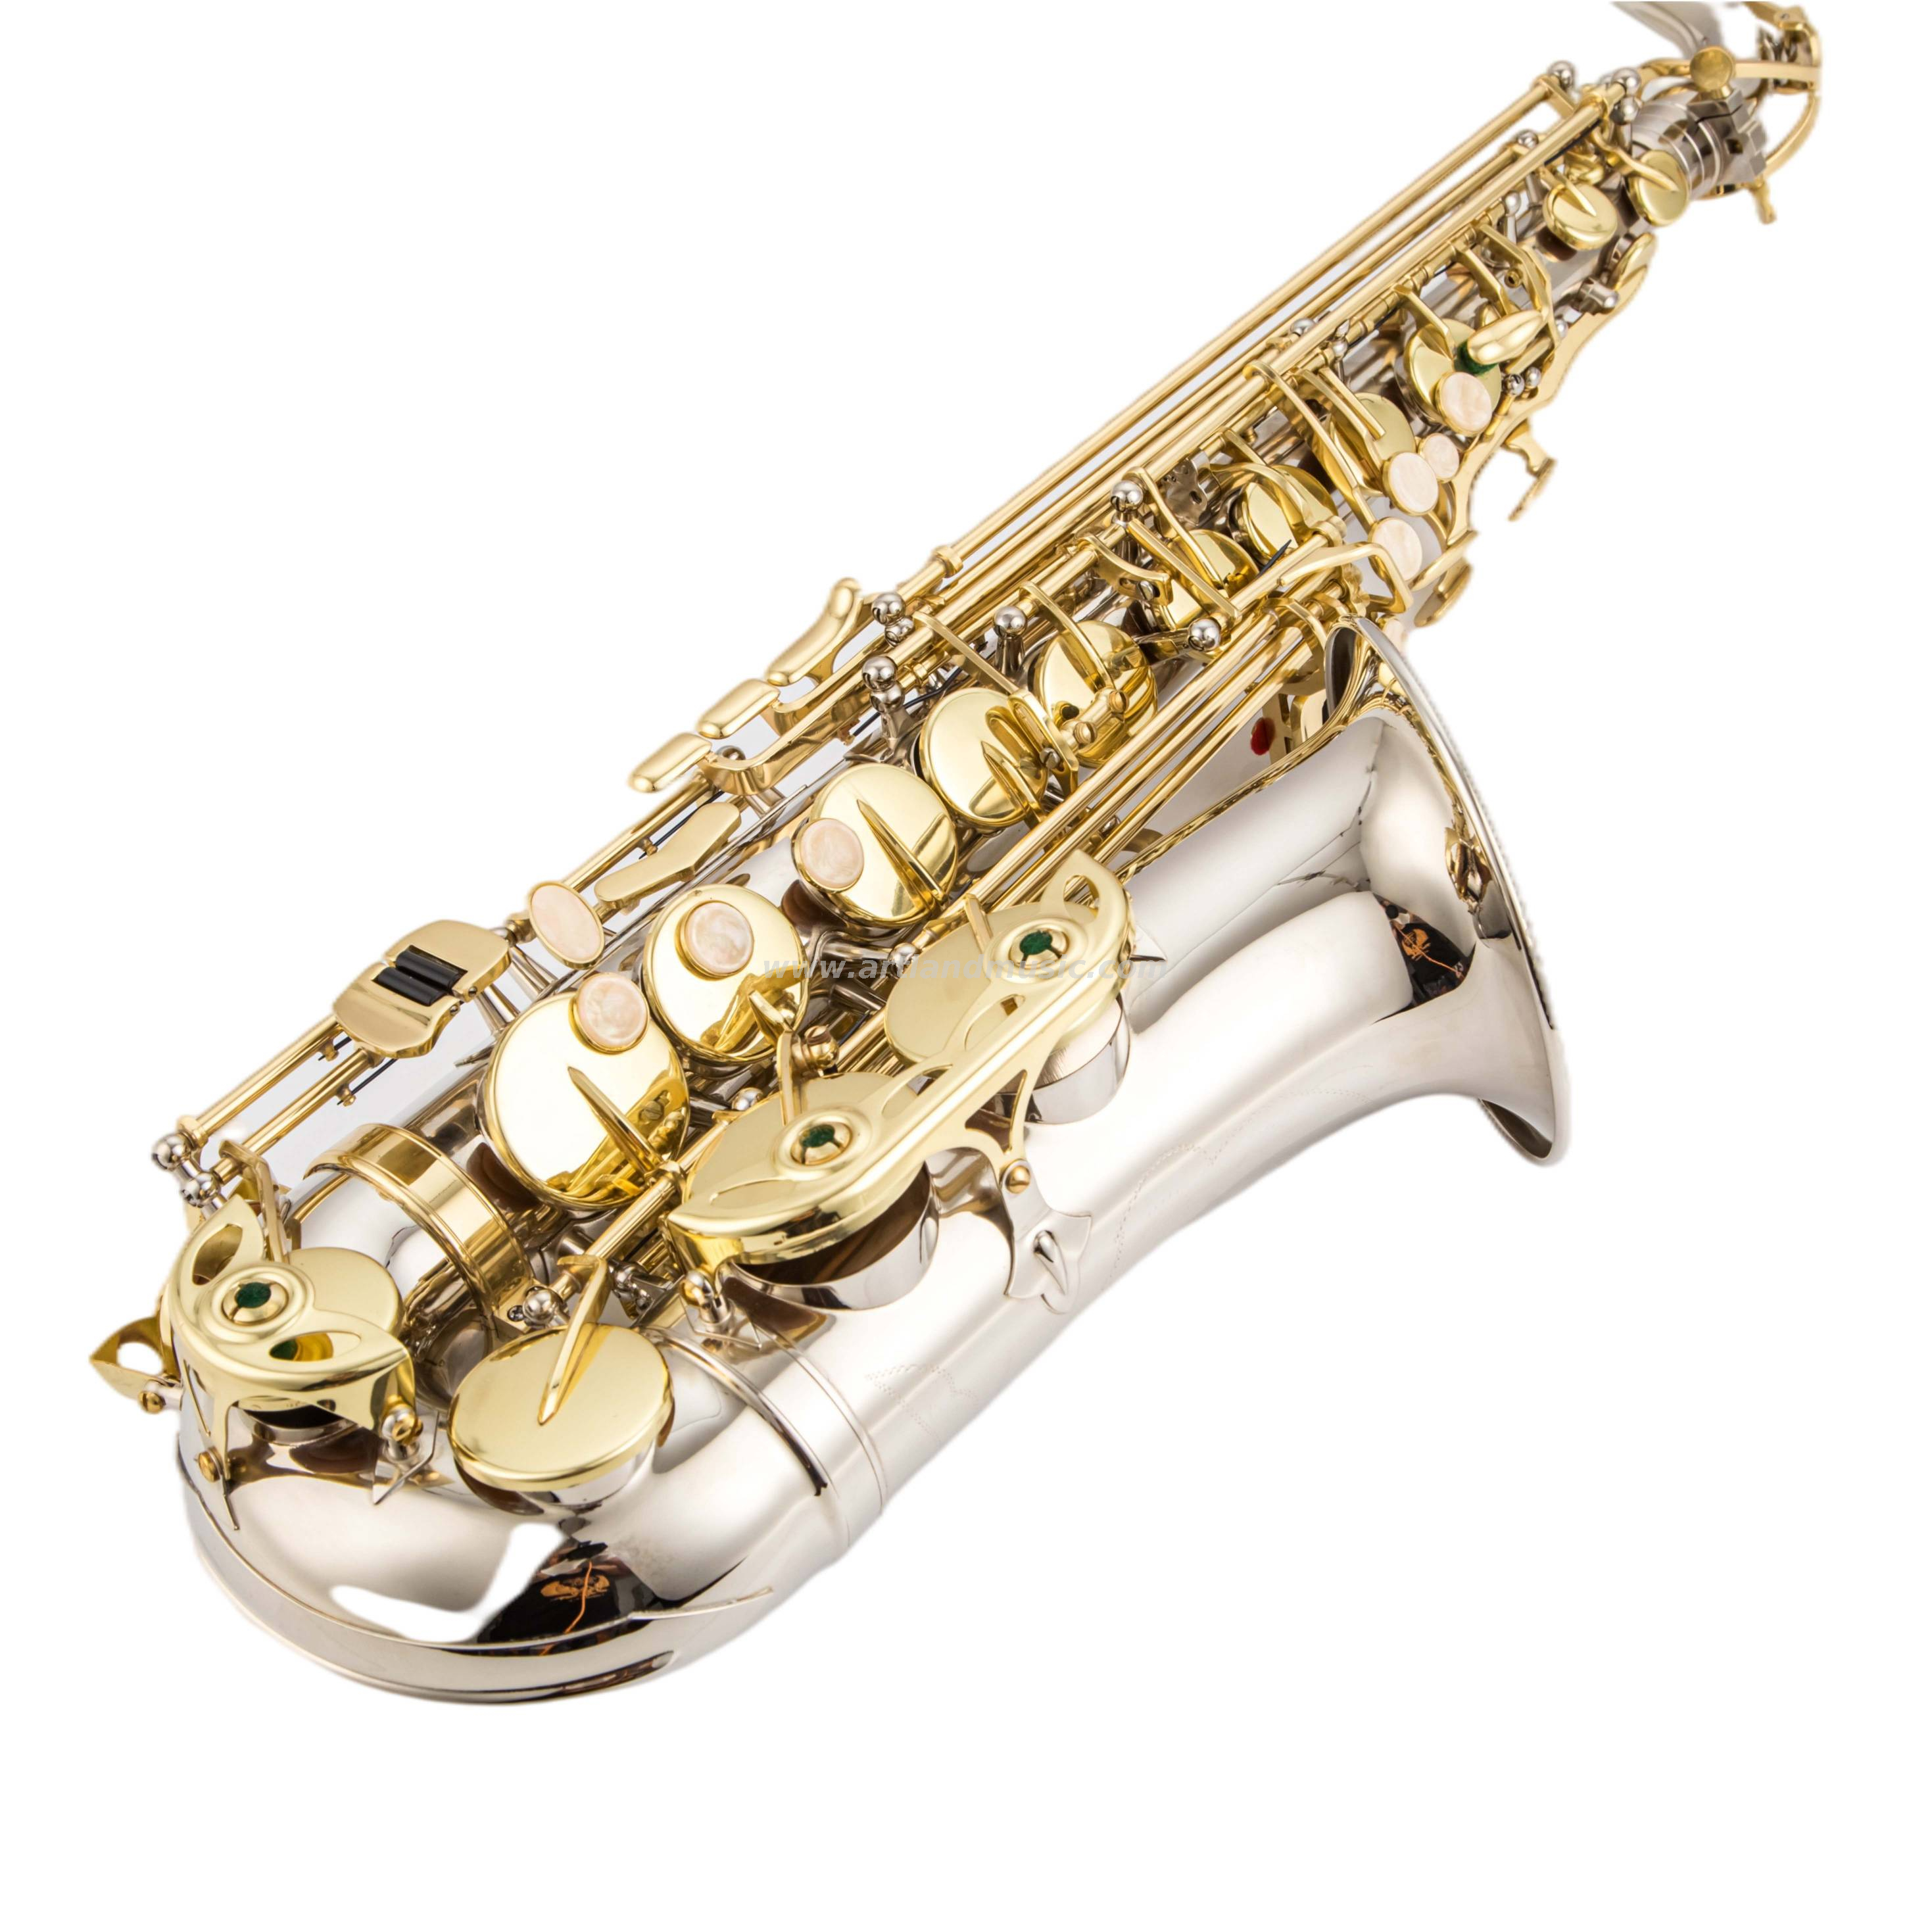 Nickel Finished Alto Saxophone With Gold Key( AAS5505NL)